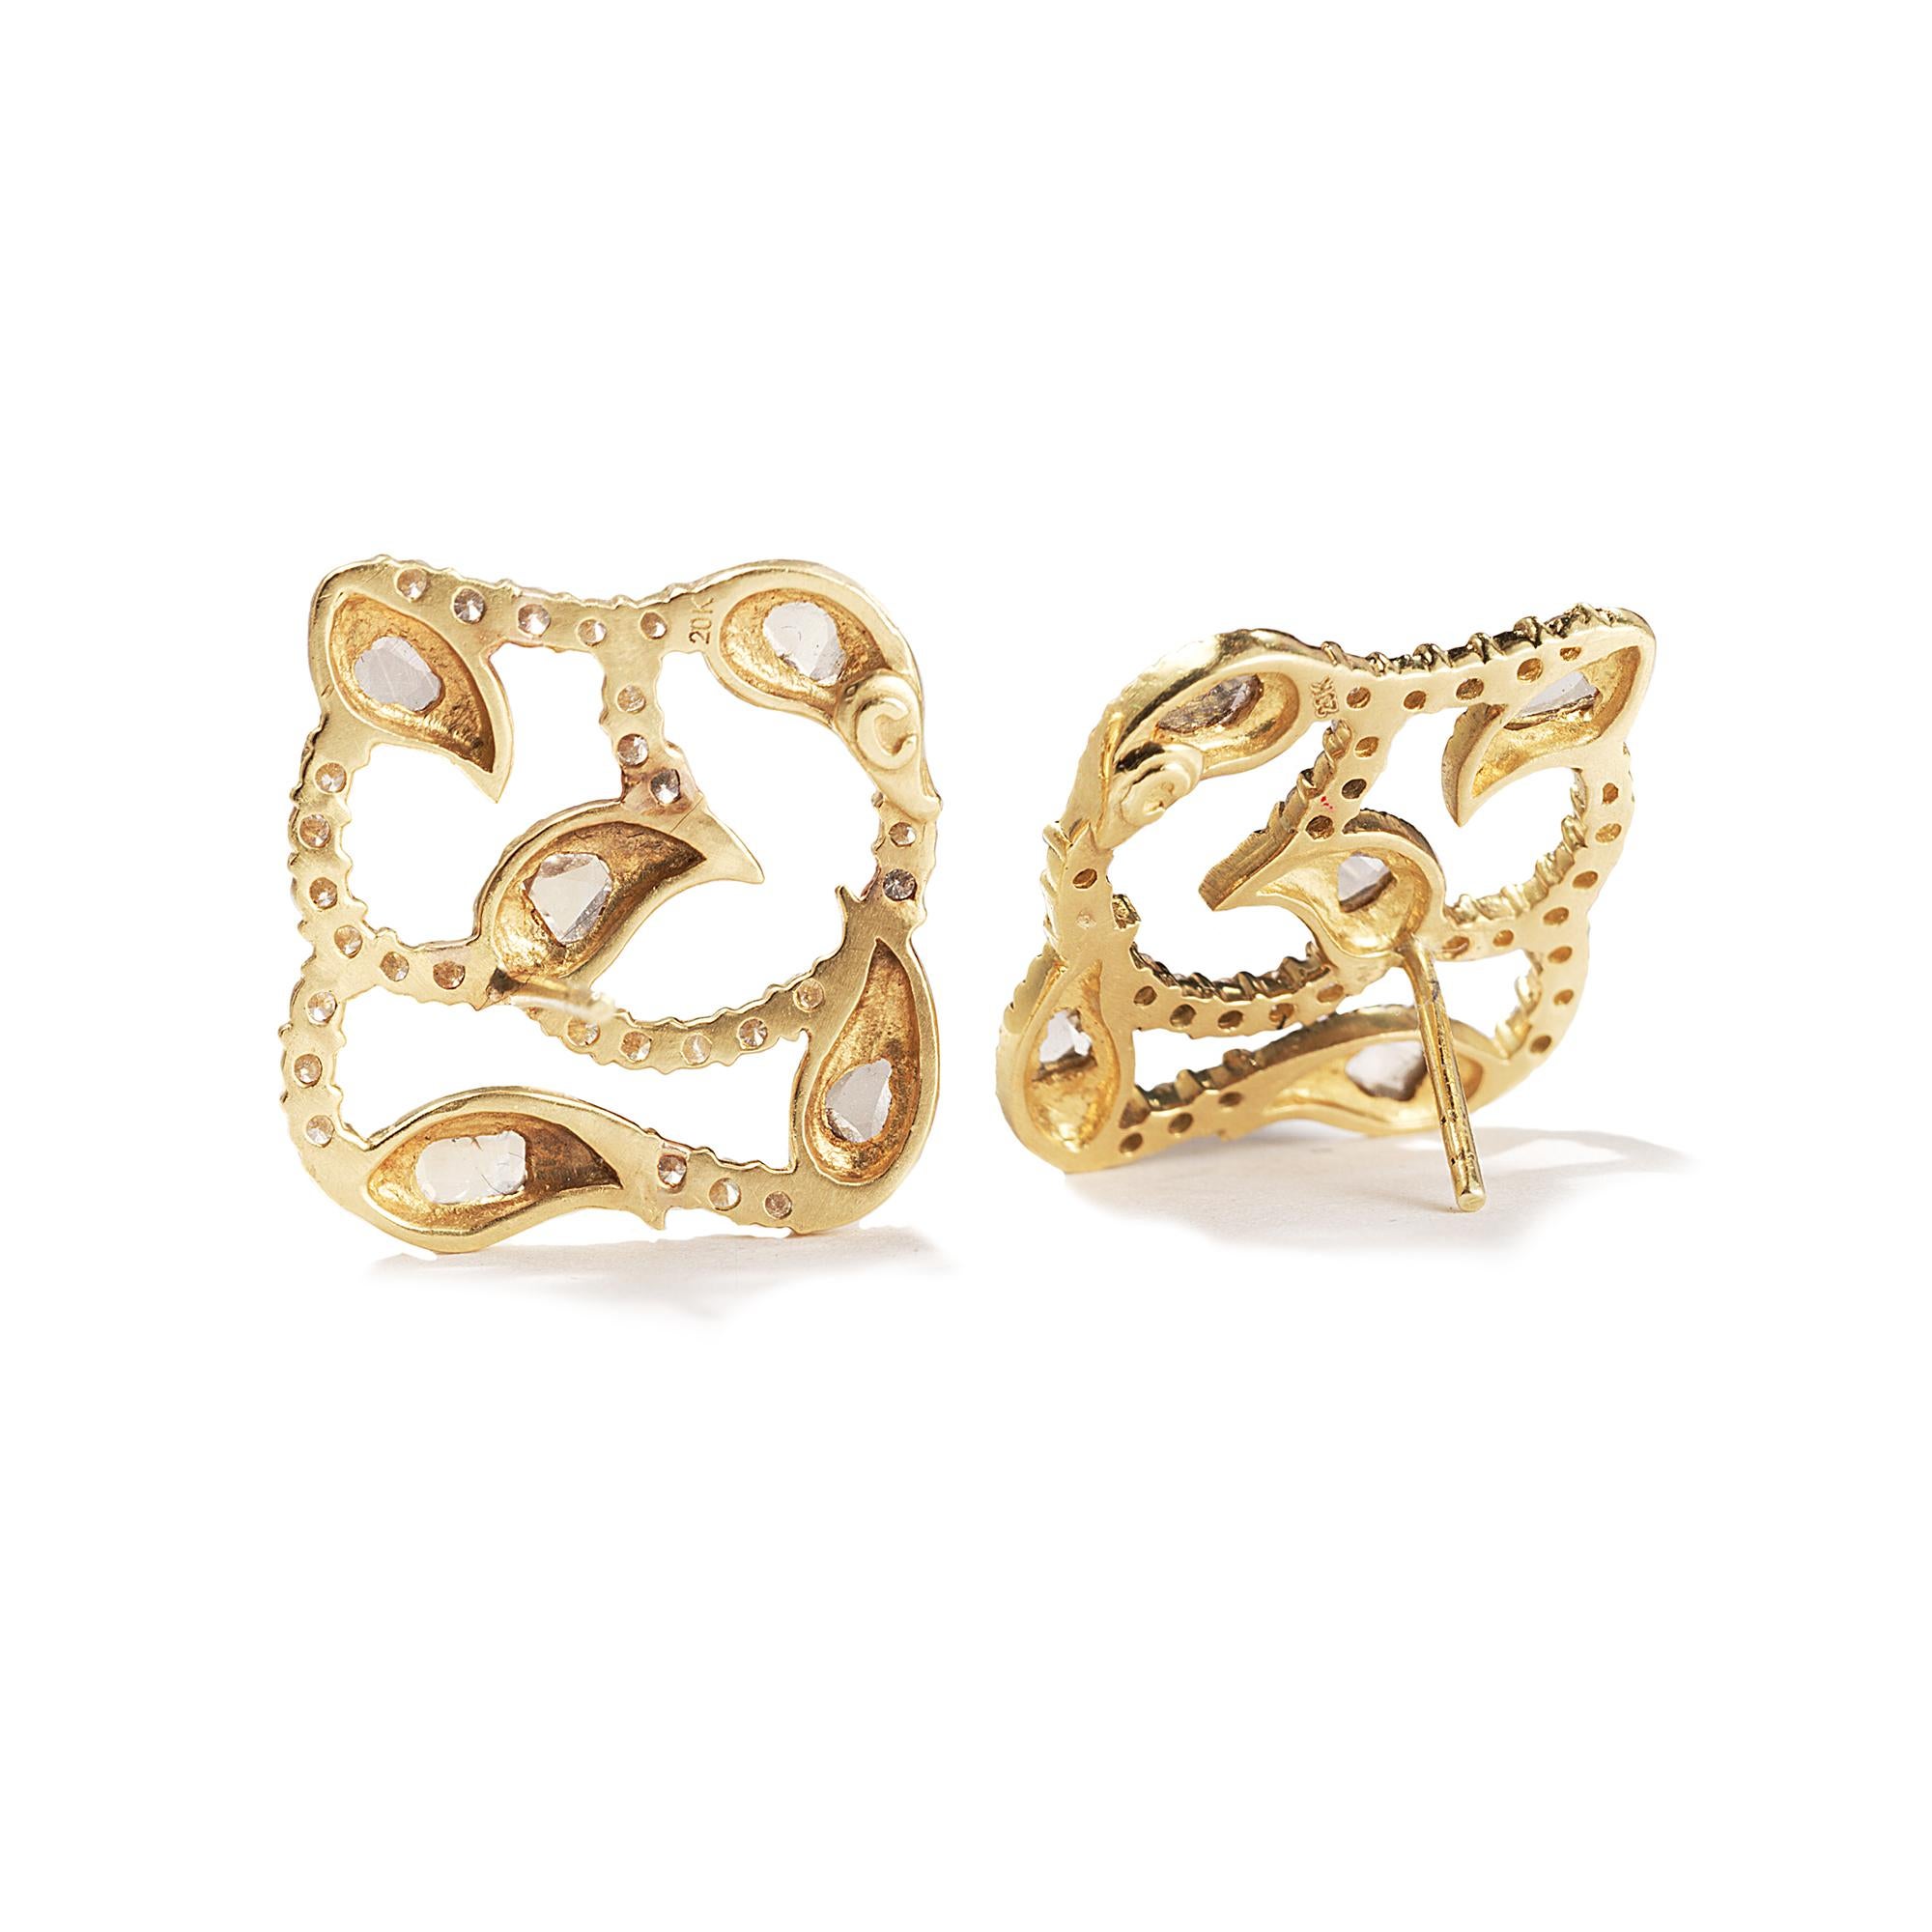 Hand made Coomi Vitality collection vine design stud earrings set in 20K yellow gold with 0.43cts rose cut diamonds and 0.67cts brilliant diamonds. Total diamond carat weight 1.10cts. 